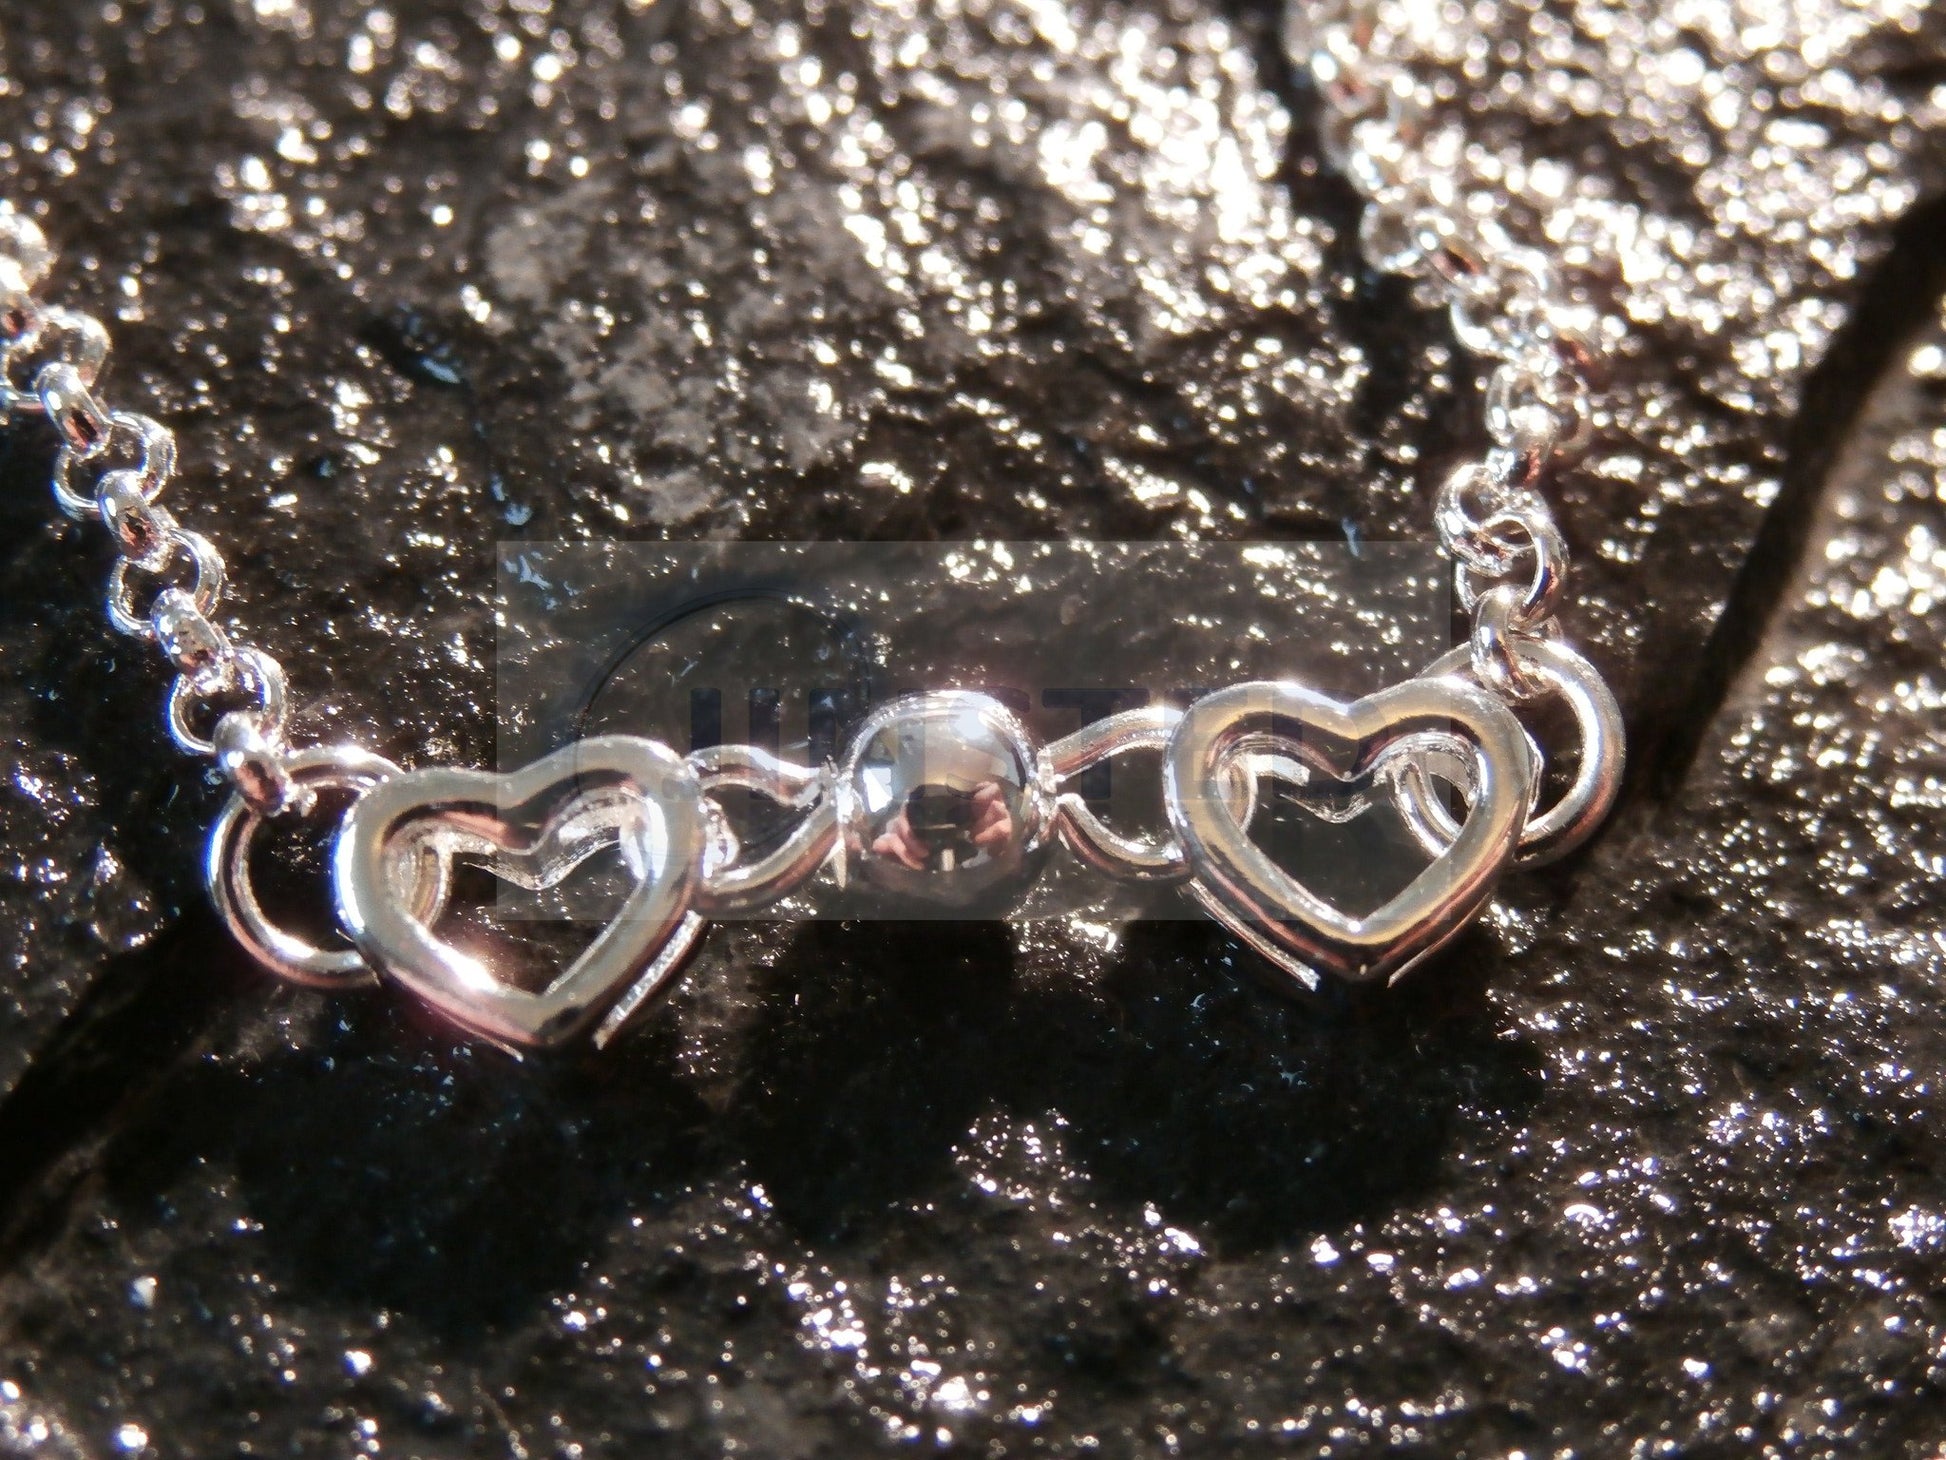 Ladies Jewellery, Silver Anklet with 6 3D Heart Charms, Jinsted